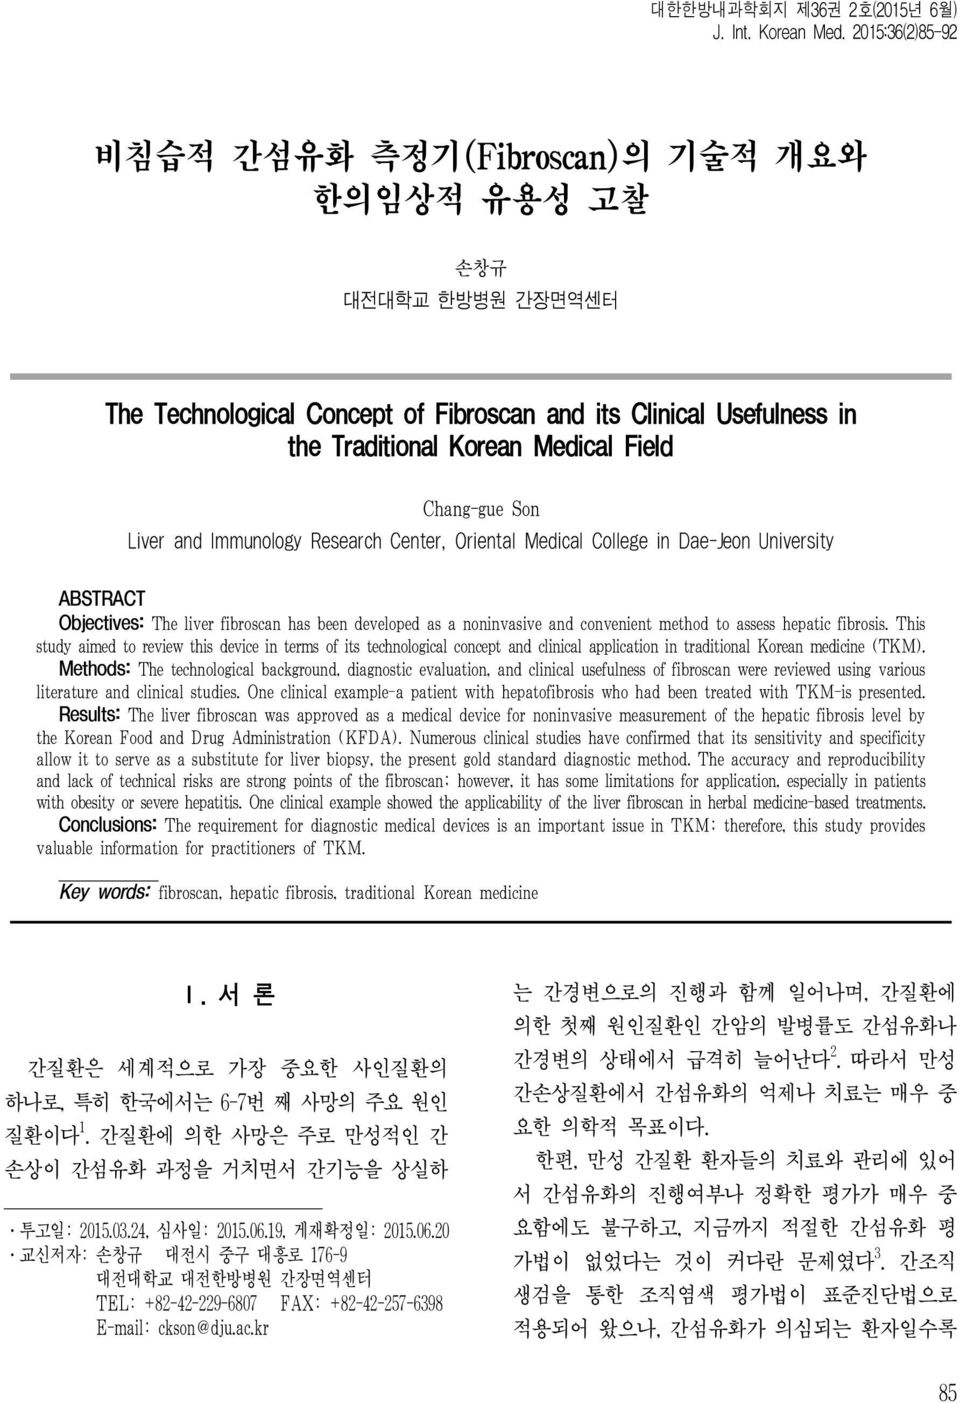 Chang-gue Son Liver and Immunology Research Center, Oriental Medical College in Dae-Jeon University ABSTRACT Objectives: The liver fibroscan has been developed as a noninvasive and convenient method